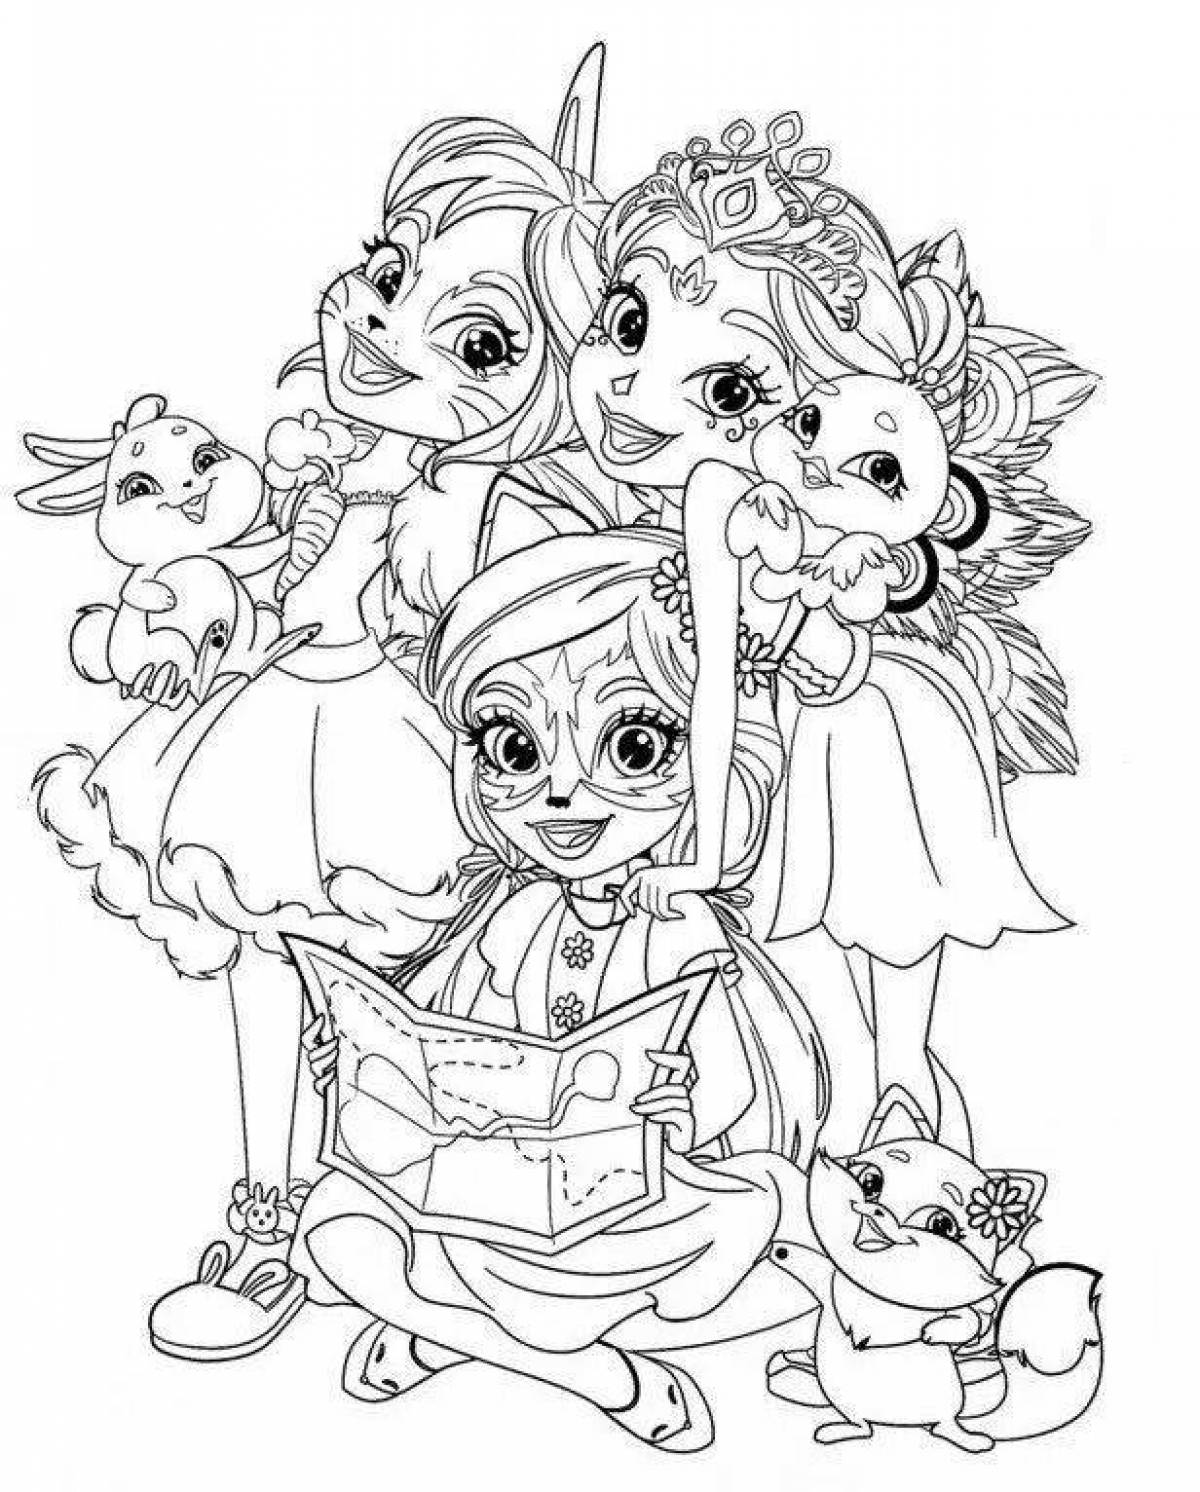 Glowing inchanchymus coloring page